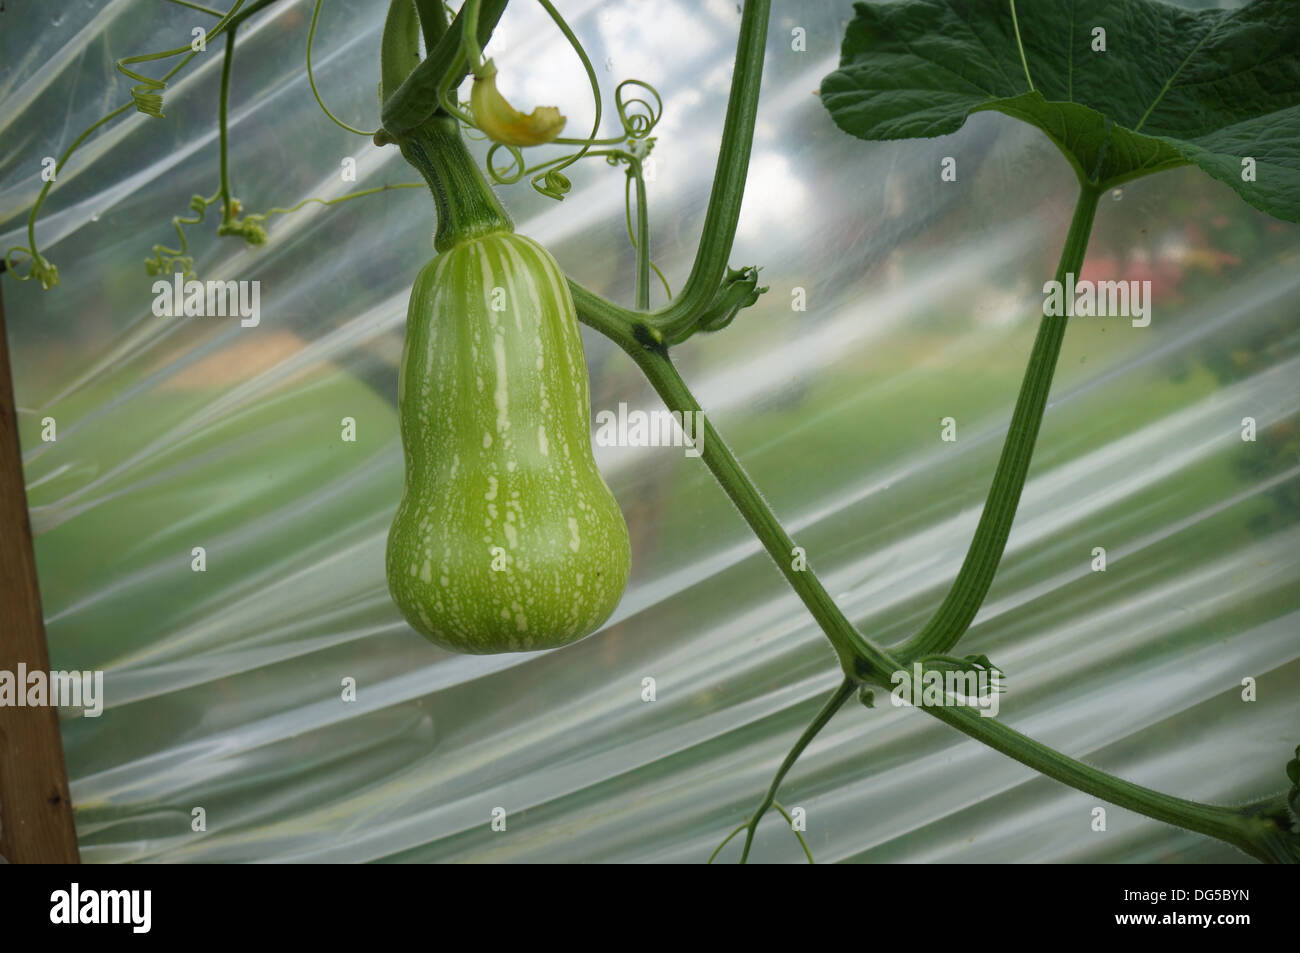 Waltham Butternut, winter squash hanging in a green house, polytunnel Stock Photo